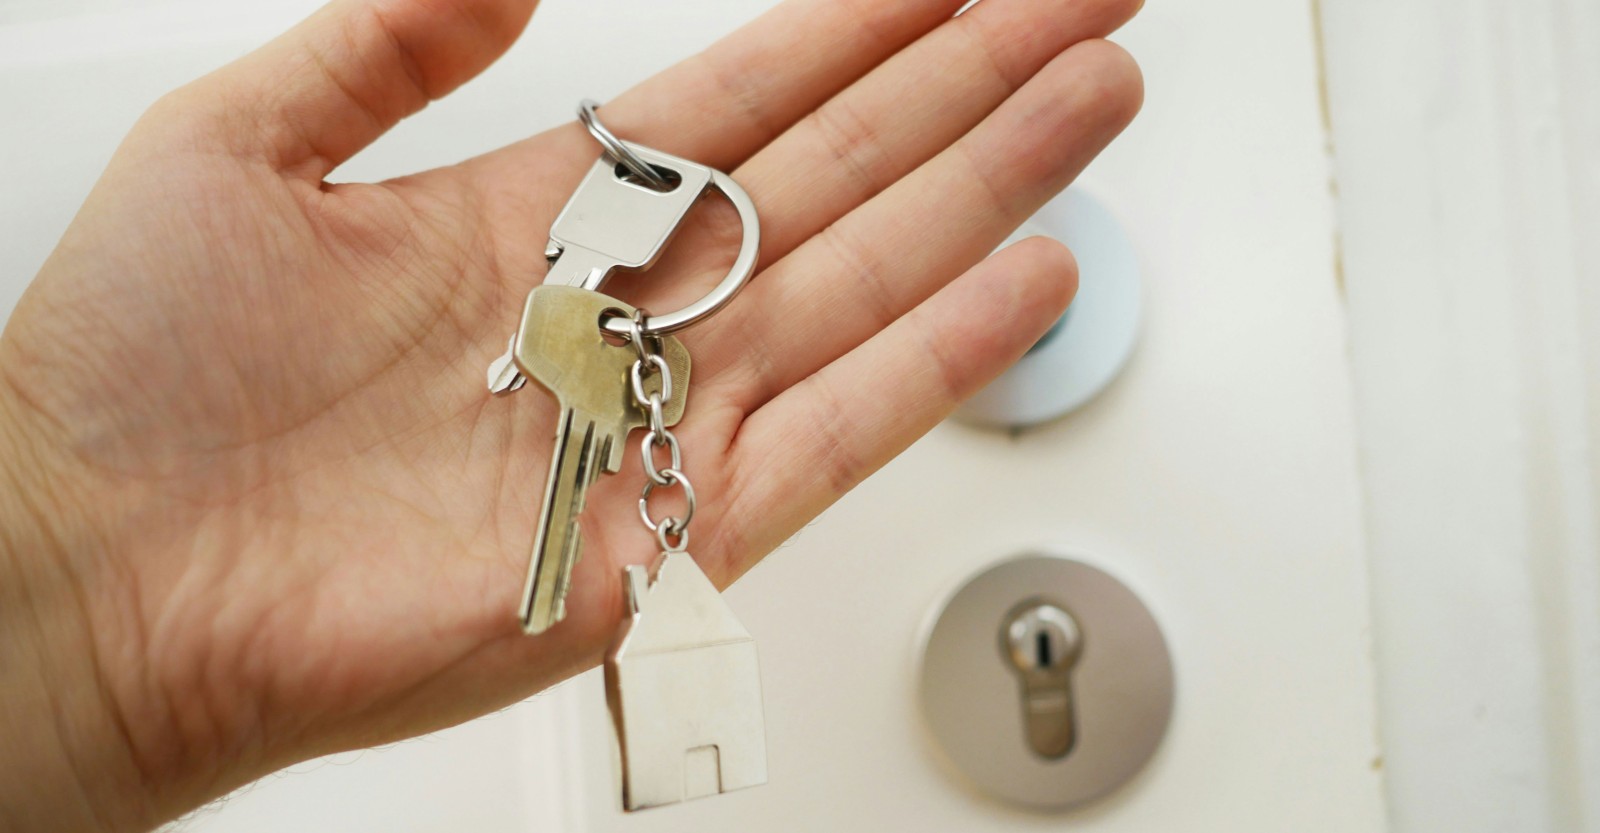 Keys on a keyring being held by a hand